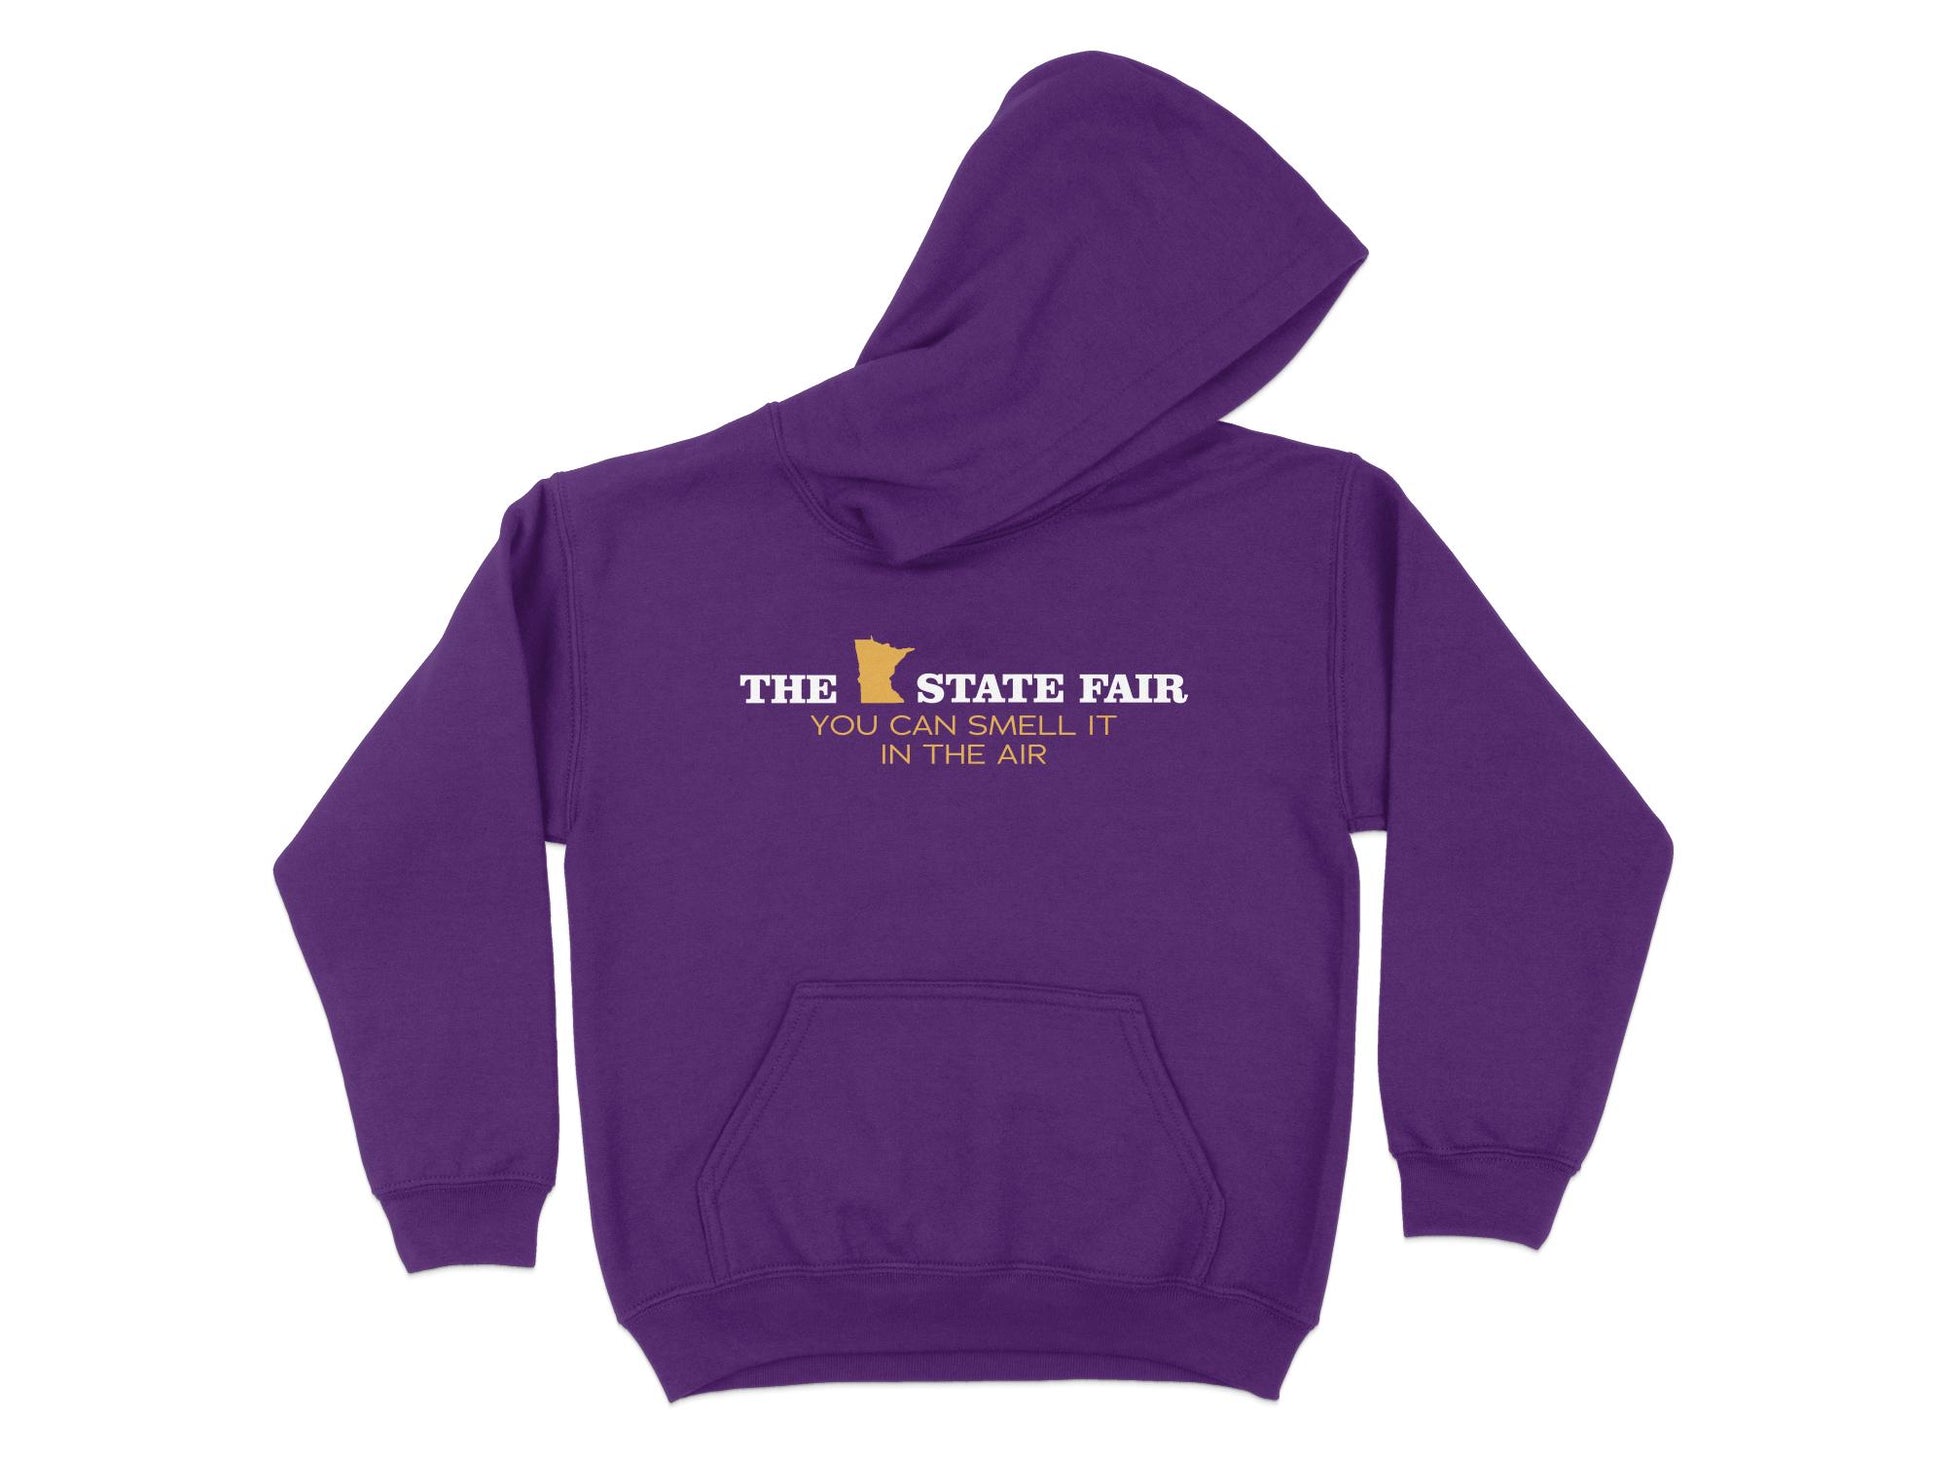 Minnesota State Fair Hoodie - You Can Smell It in the Air, purple